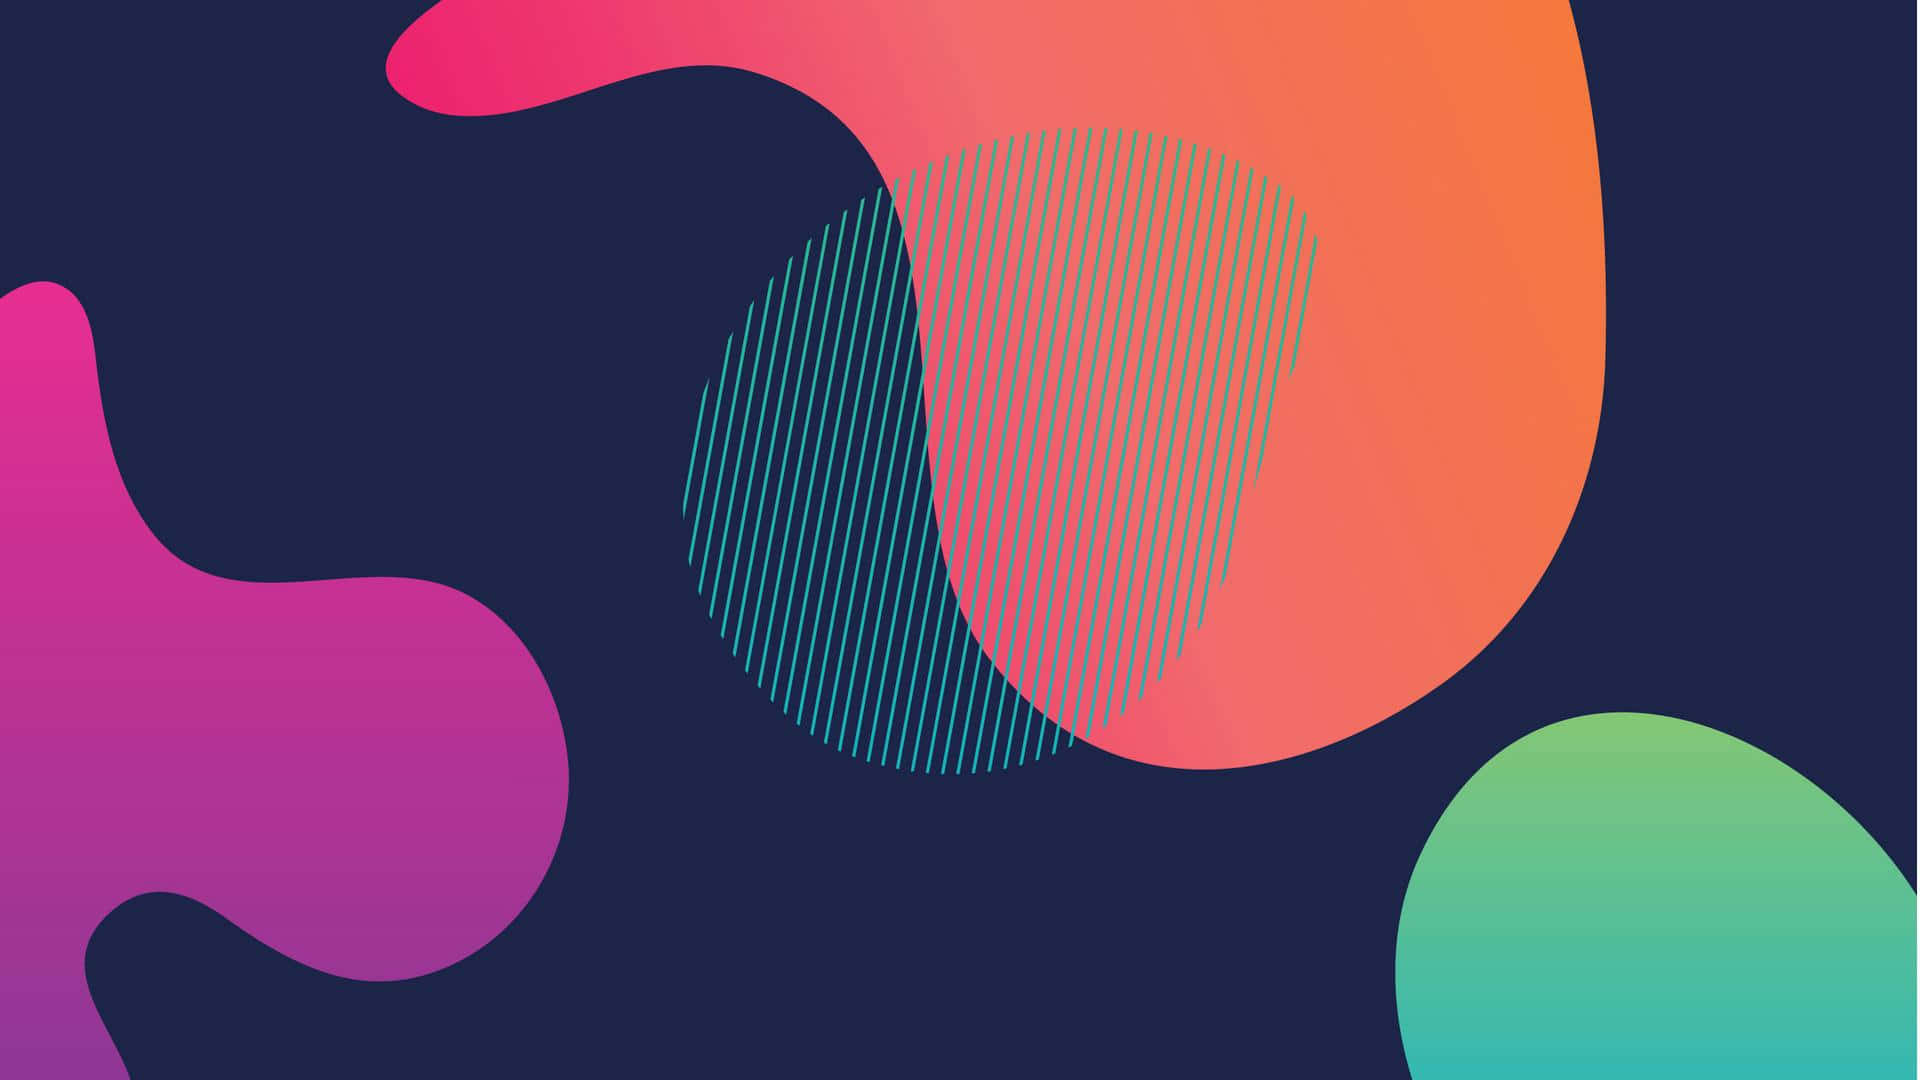 A Colorful Abstract Background With Colorful Shapes